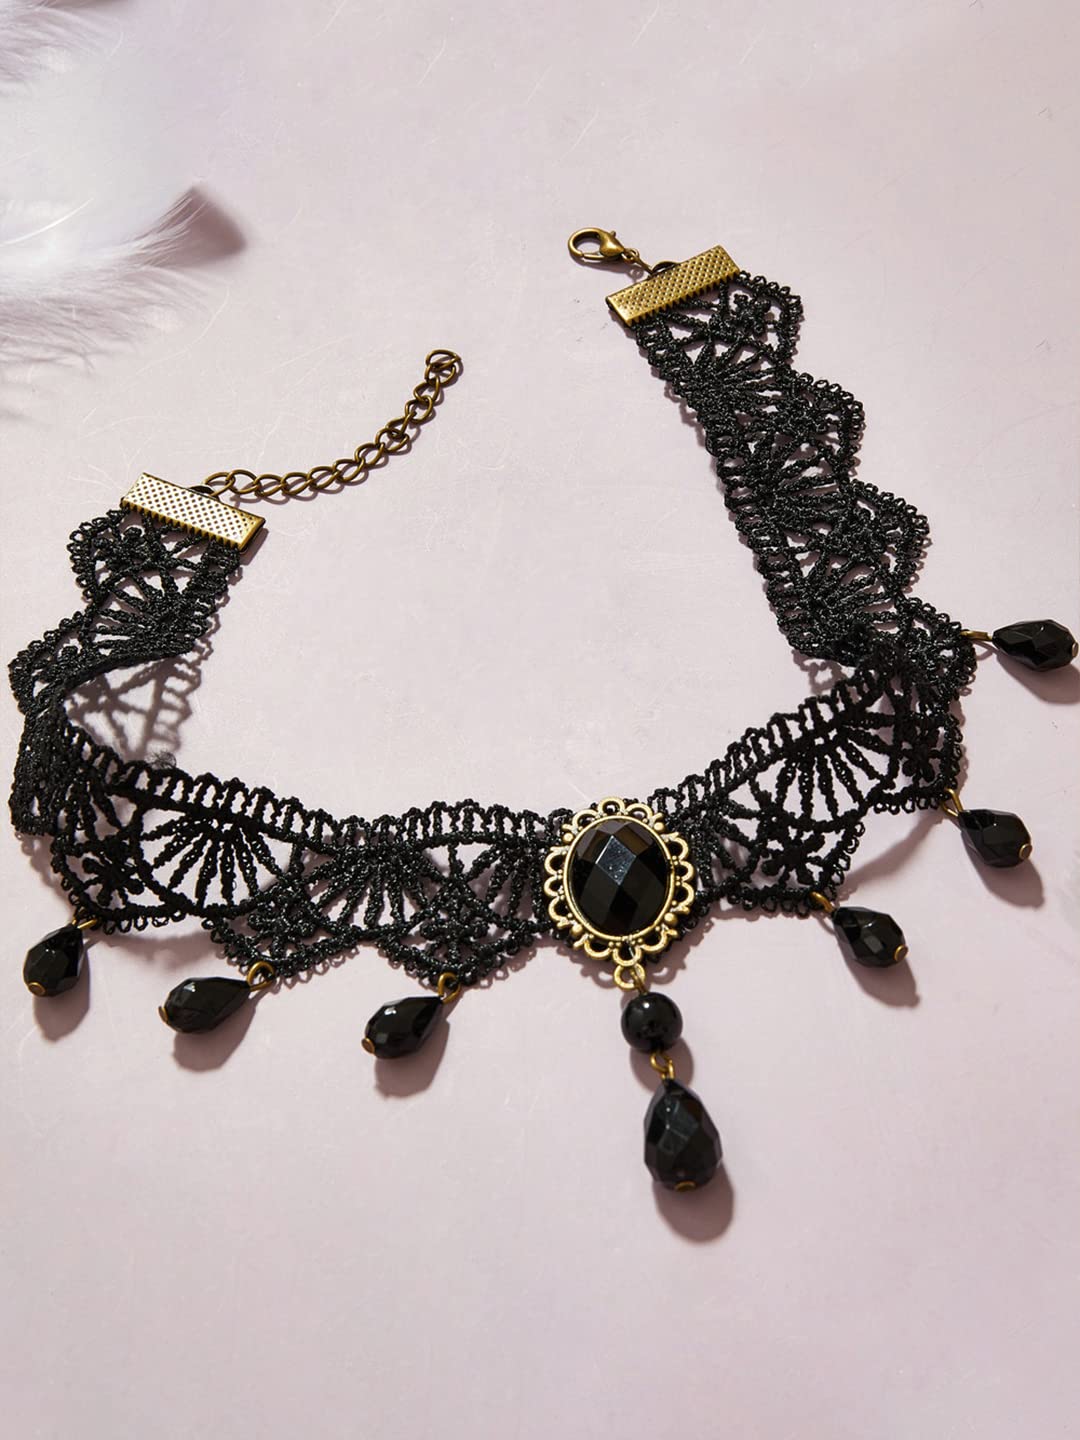 Yellow Chimes Necklace For Women Black Fabric Lace With Black Stone Hanging Choker Necklace For Women and Girls